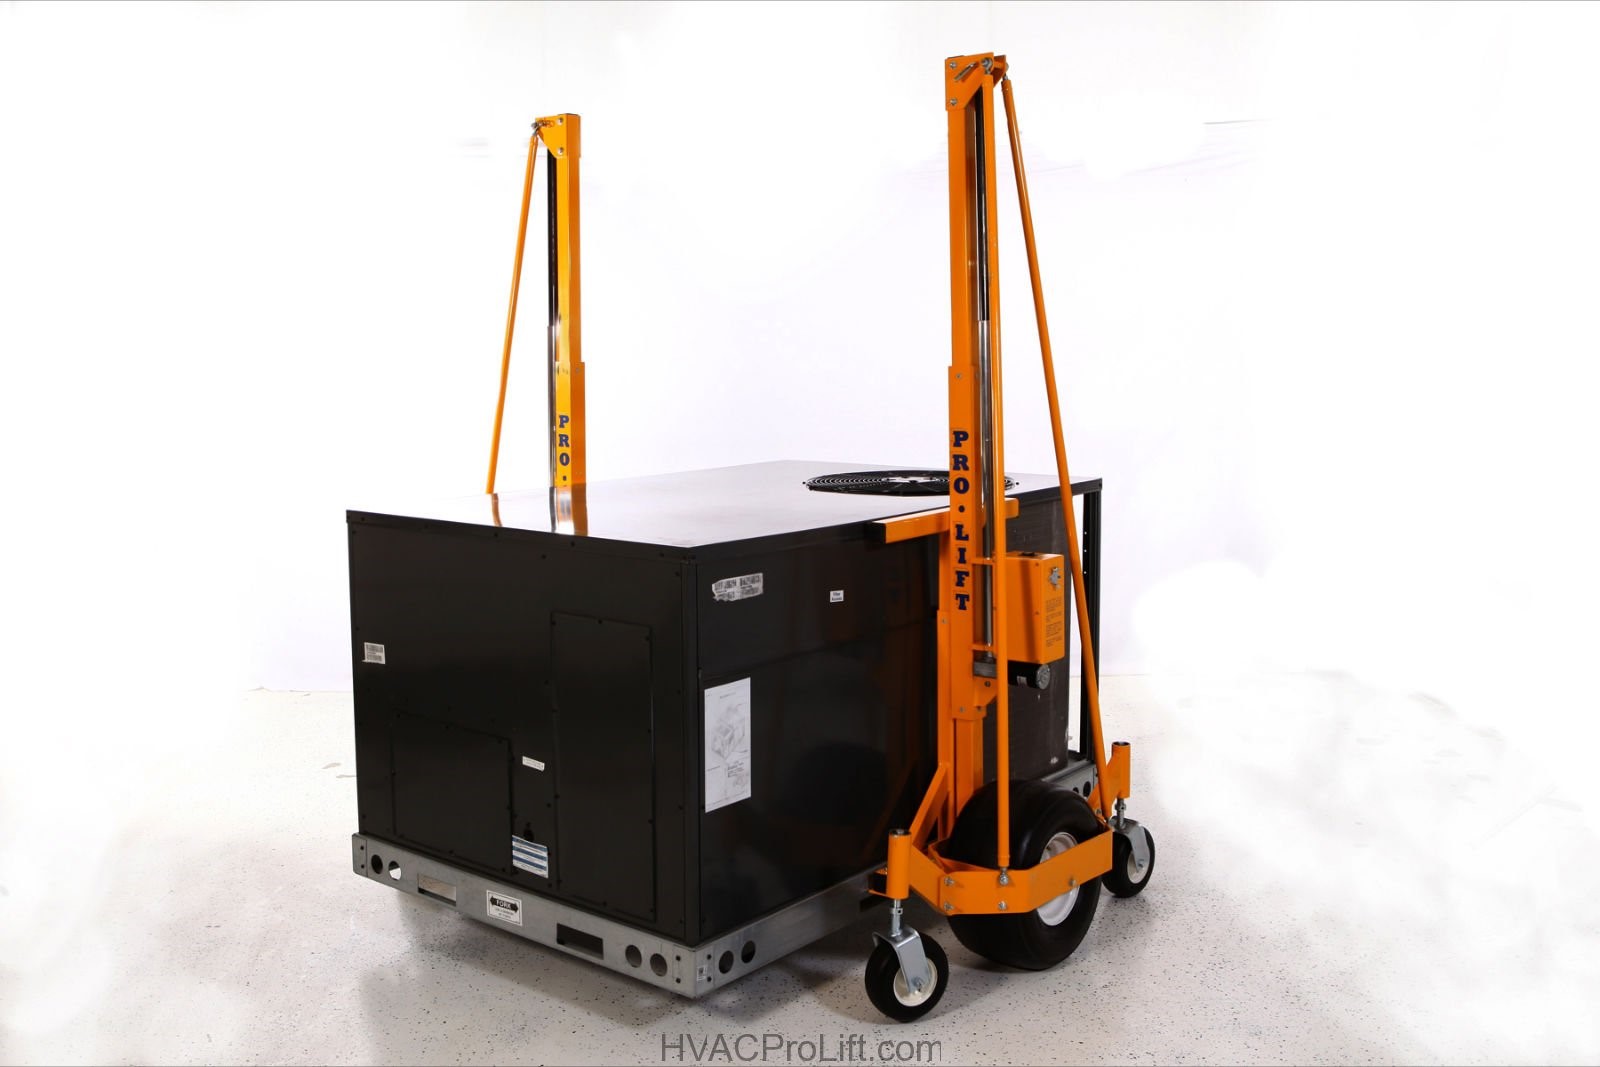 Pro Lift Air Conditioner Lifting and Transport System